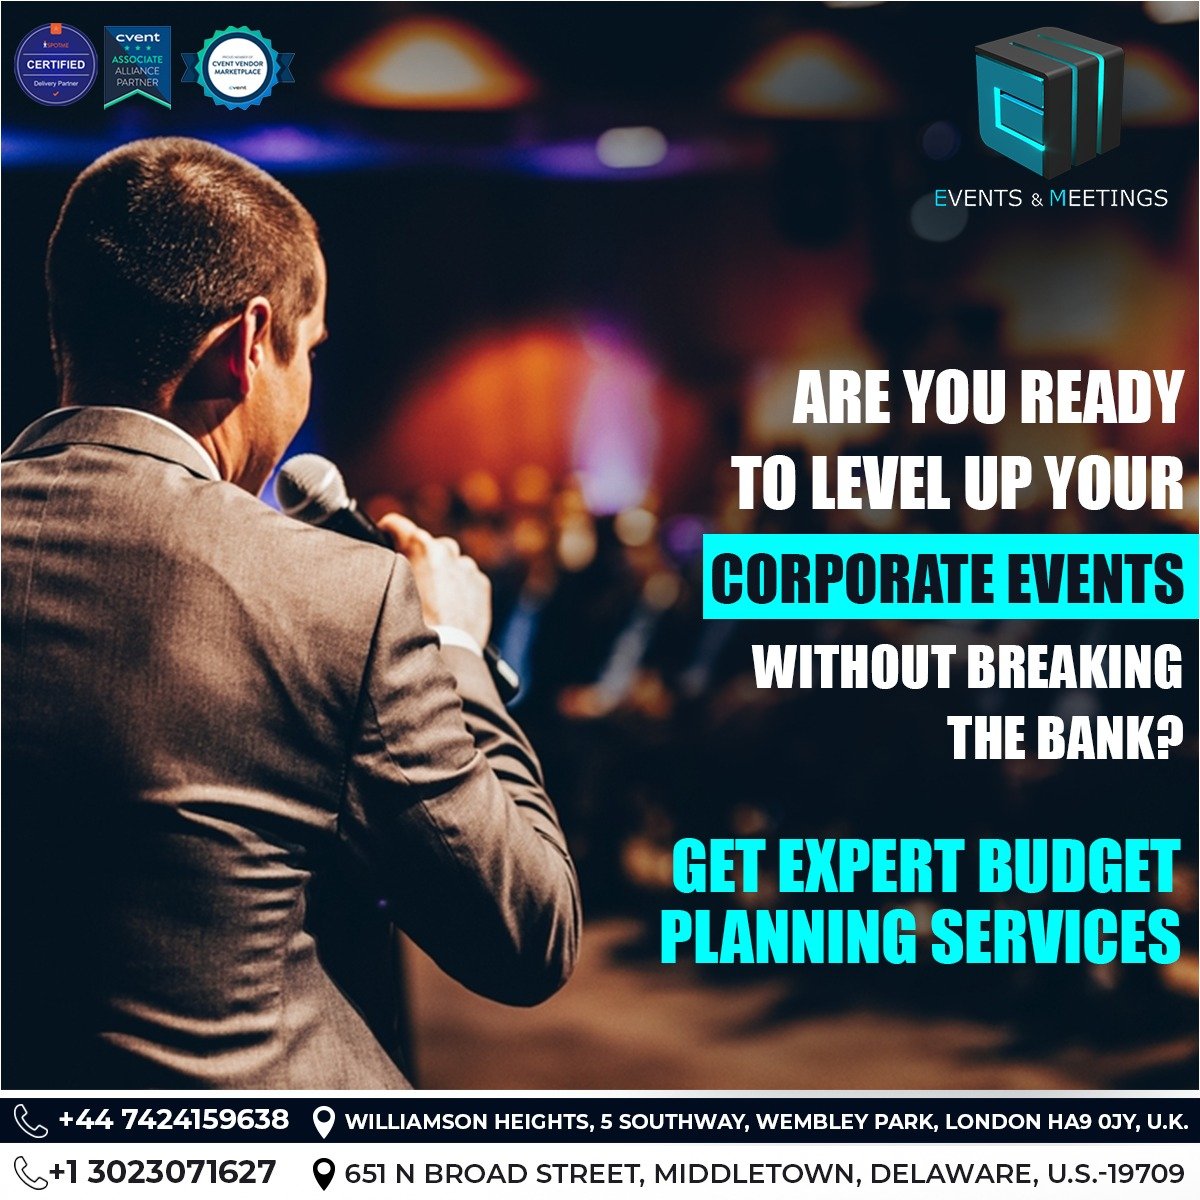 Unlock unparalleled success for your corporate events!

Our tech solutions & expert support redefine event excellence without draining your budget. 

#TechForEvents #VirtualEventsPlanner #FutureOfEvents #cvent #spotme #eventtechsolutions #eventsandmeetings